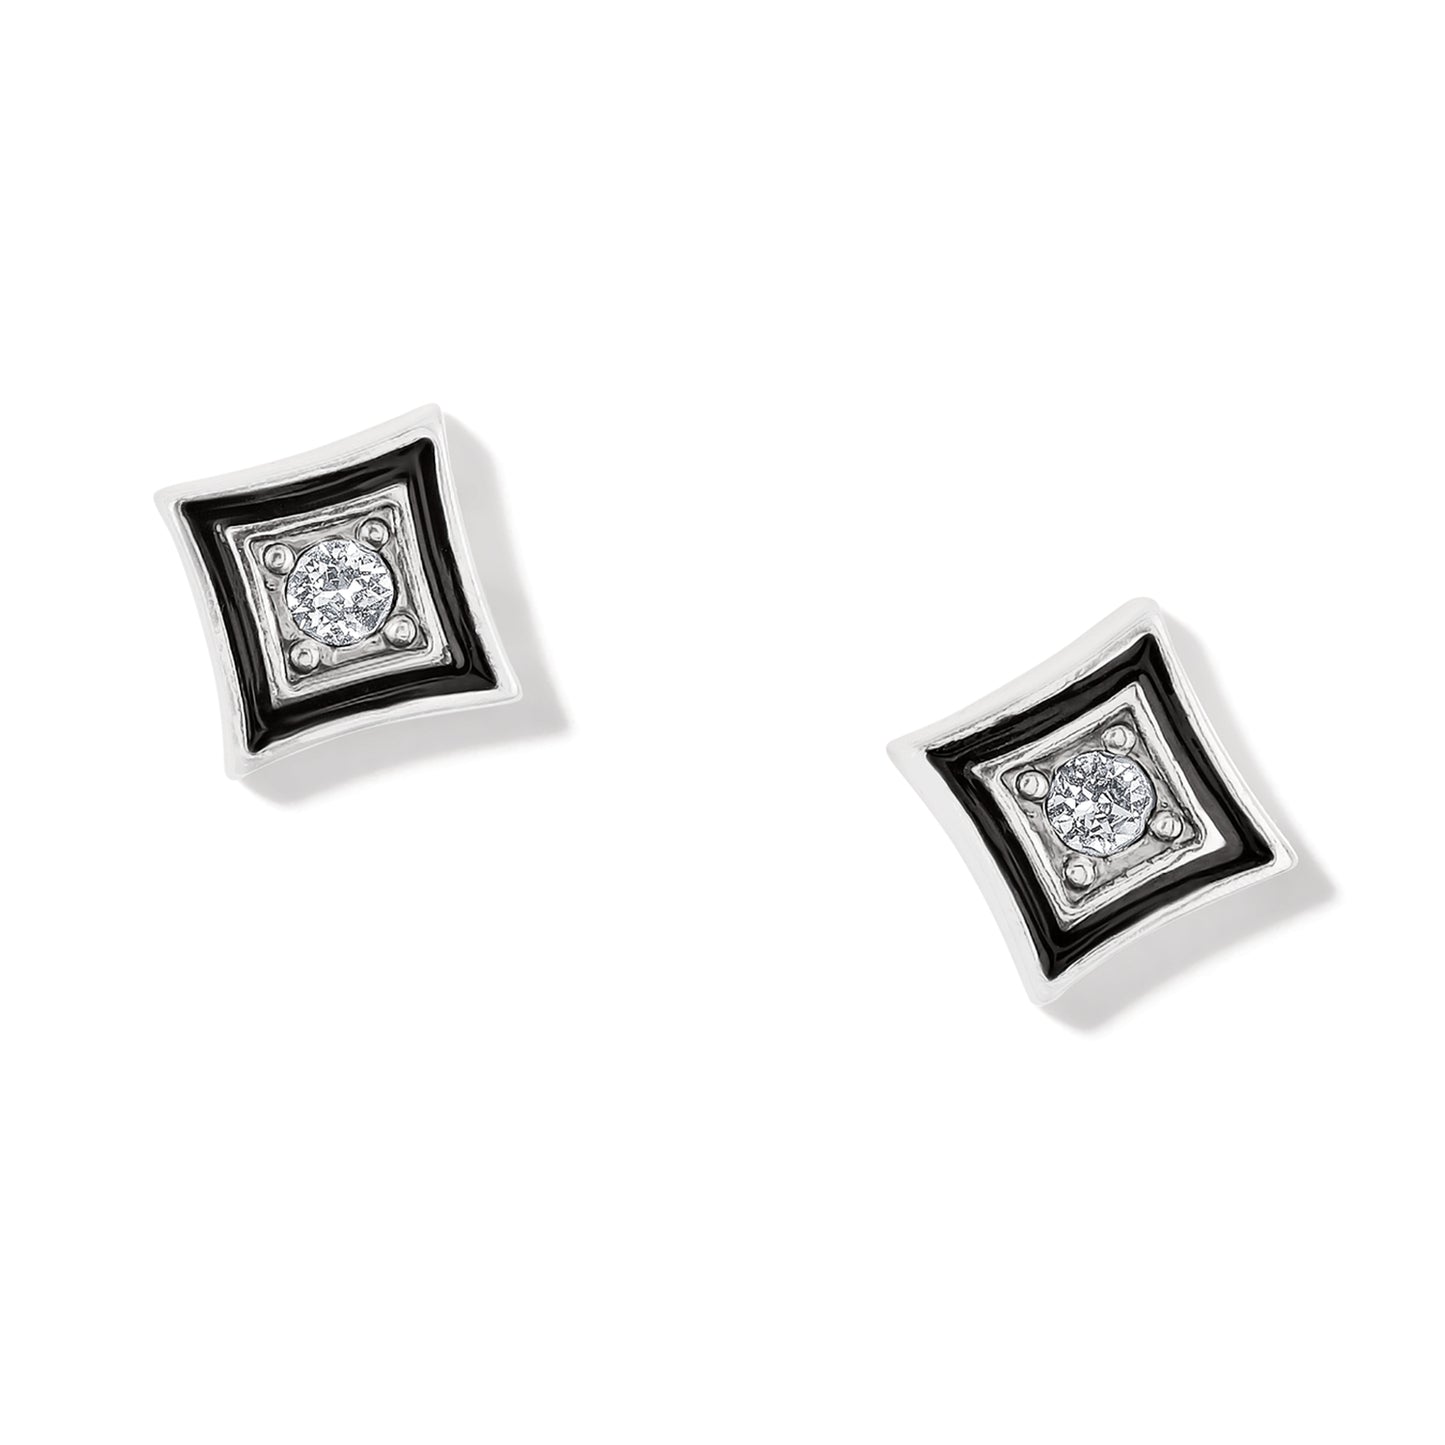 Alcazar Mystique Post Earrings, silver finish with black enamel and a single fine crystal at center, 1/4" diameter. Shop at The Painted Cottage an Annapolis Boutique.